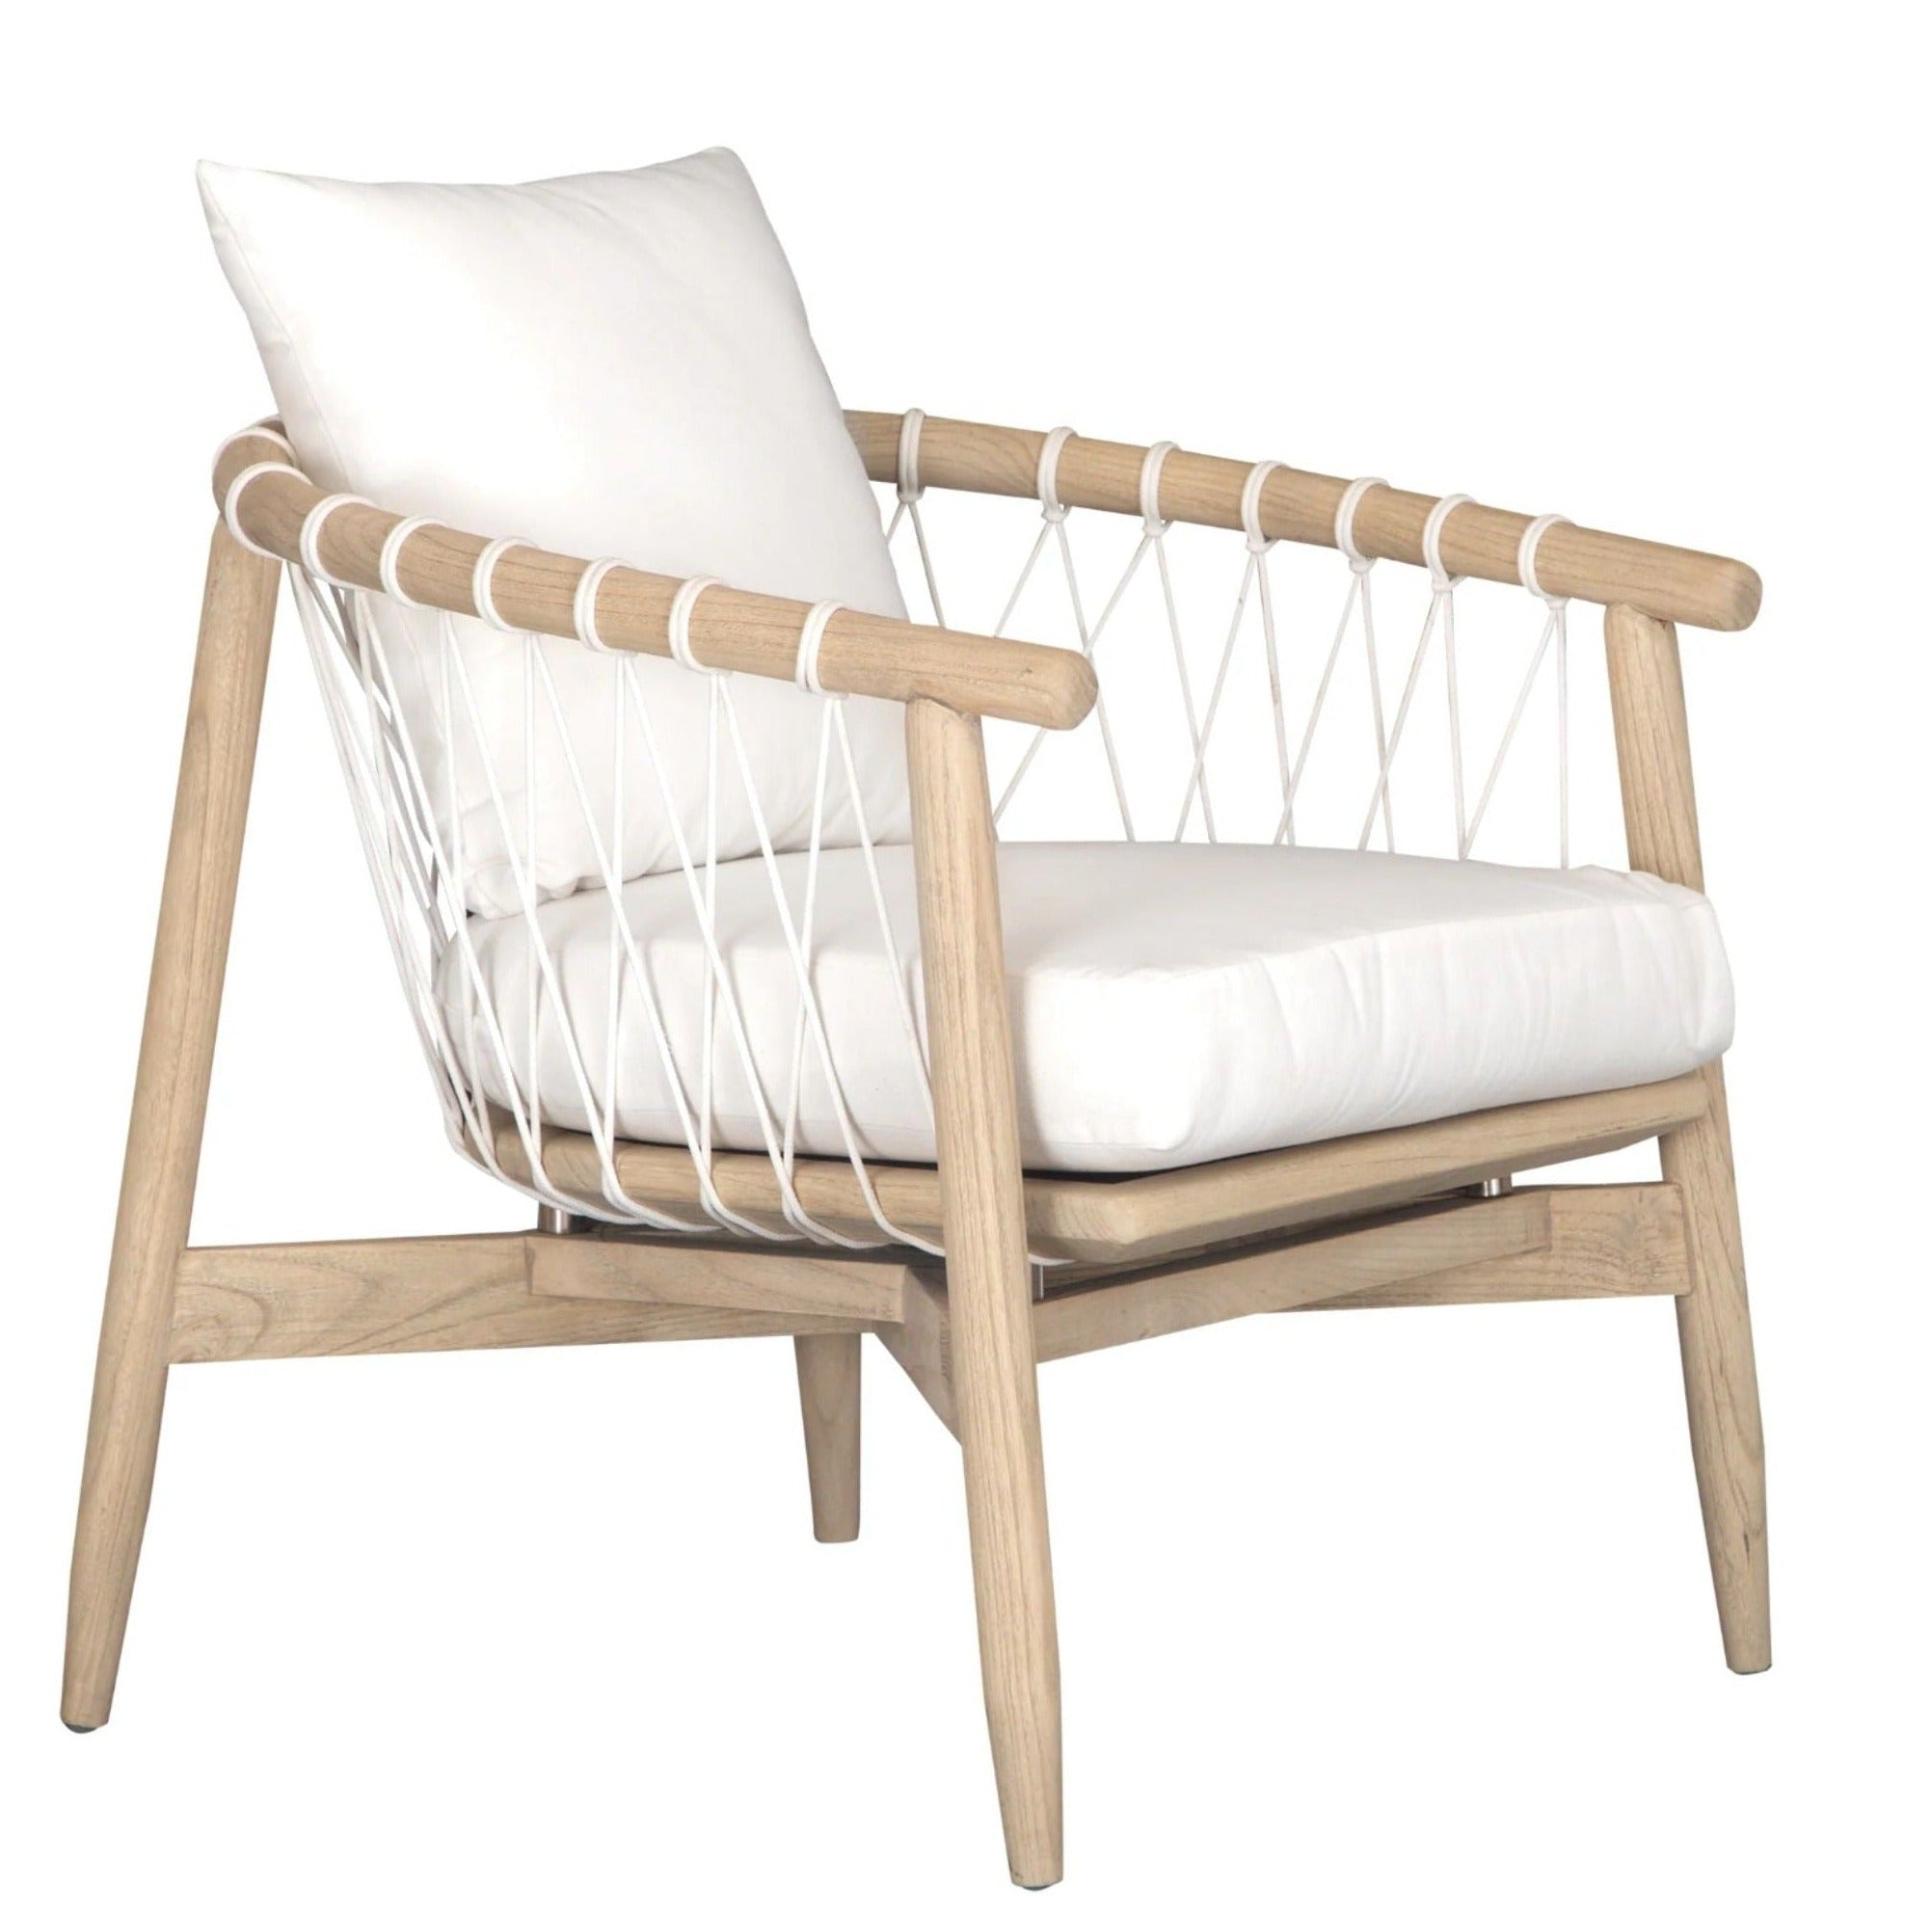 Uniqwa Arniston Occasional Chair - Natural